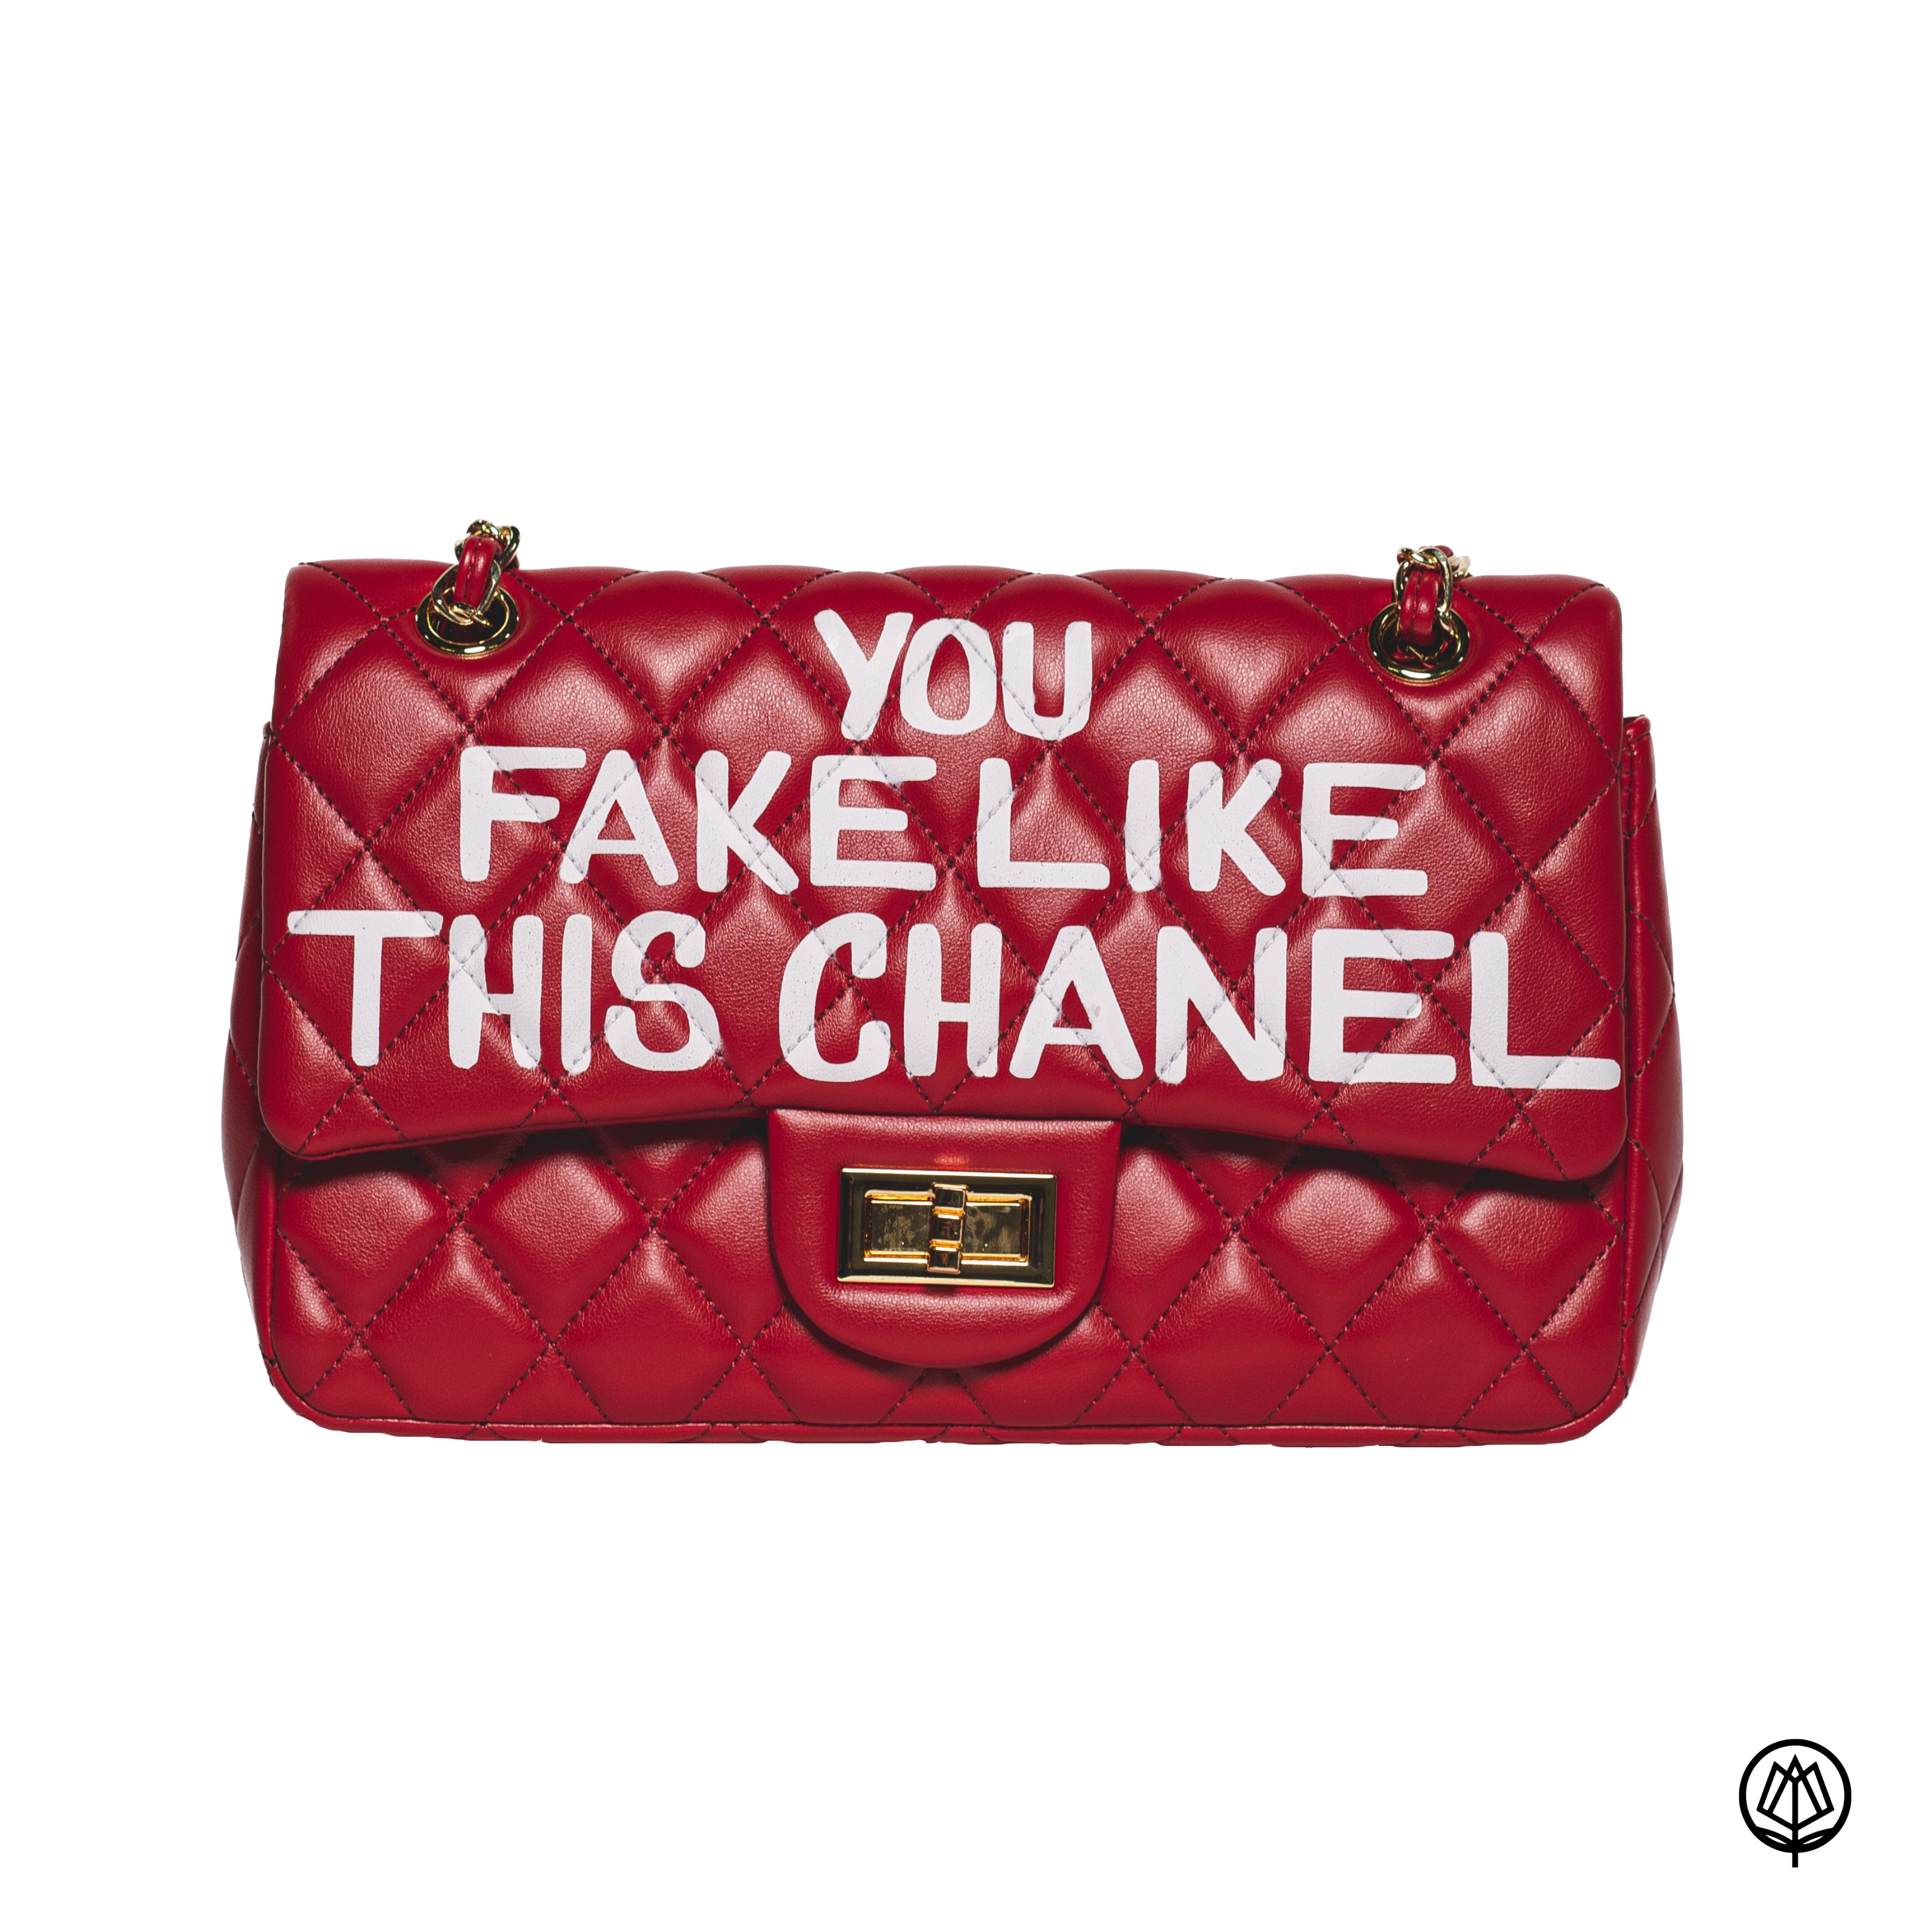 Don't Worry! It's not a fake! Chanel new breathable & recycled